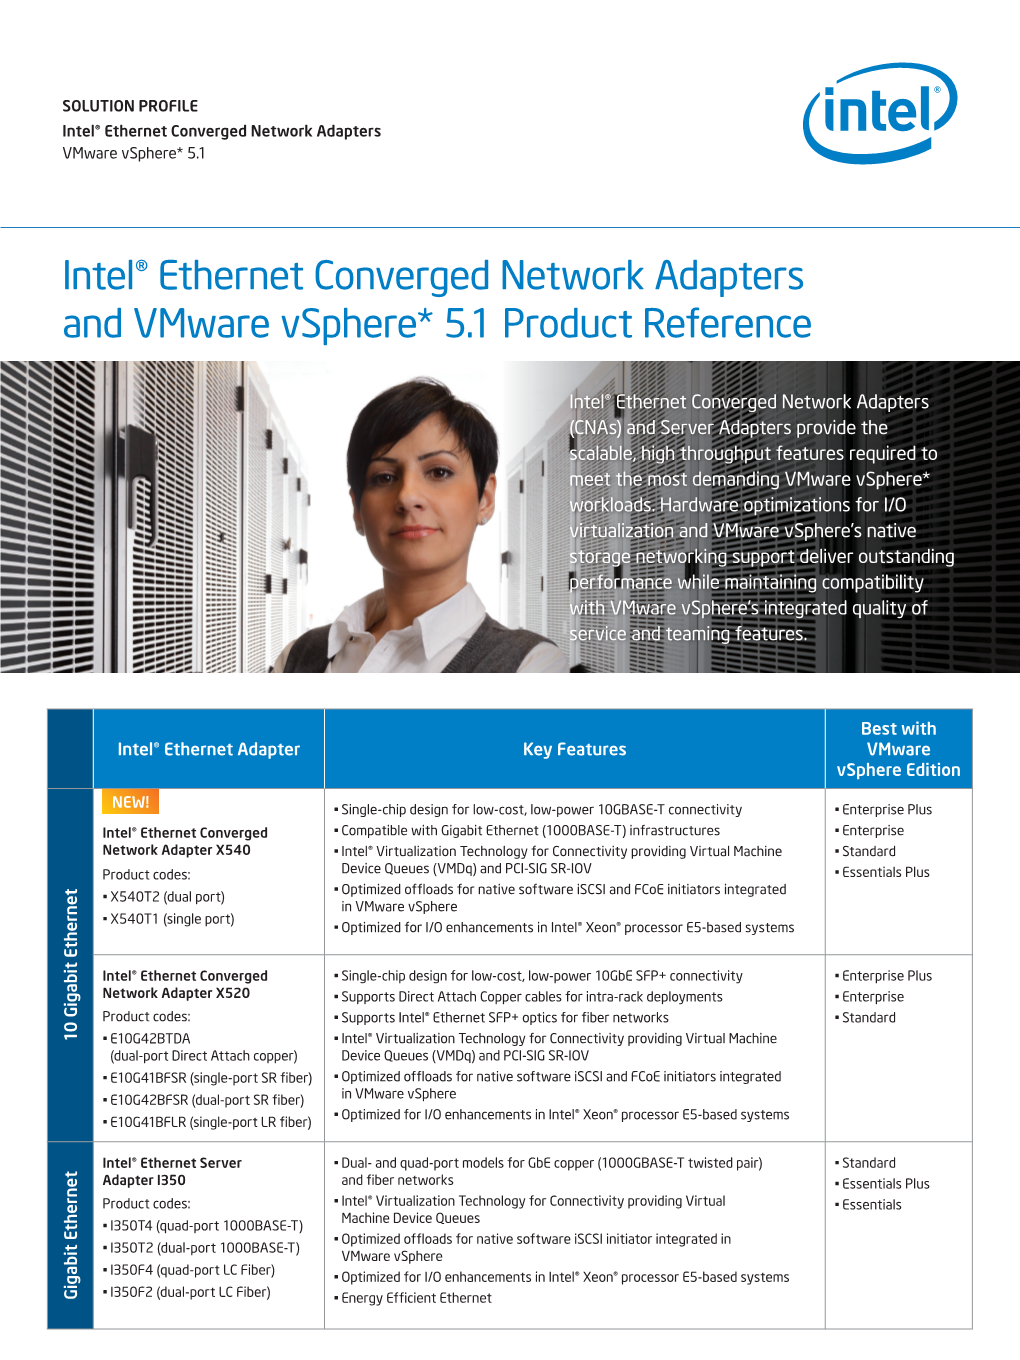 Intel® Ethernet Converged Network Adapters and Vmware Vsphere* 5.1 Product Reference